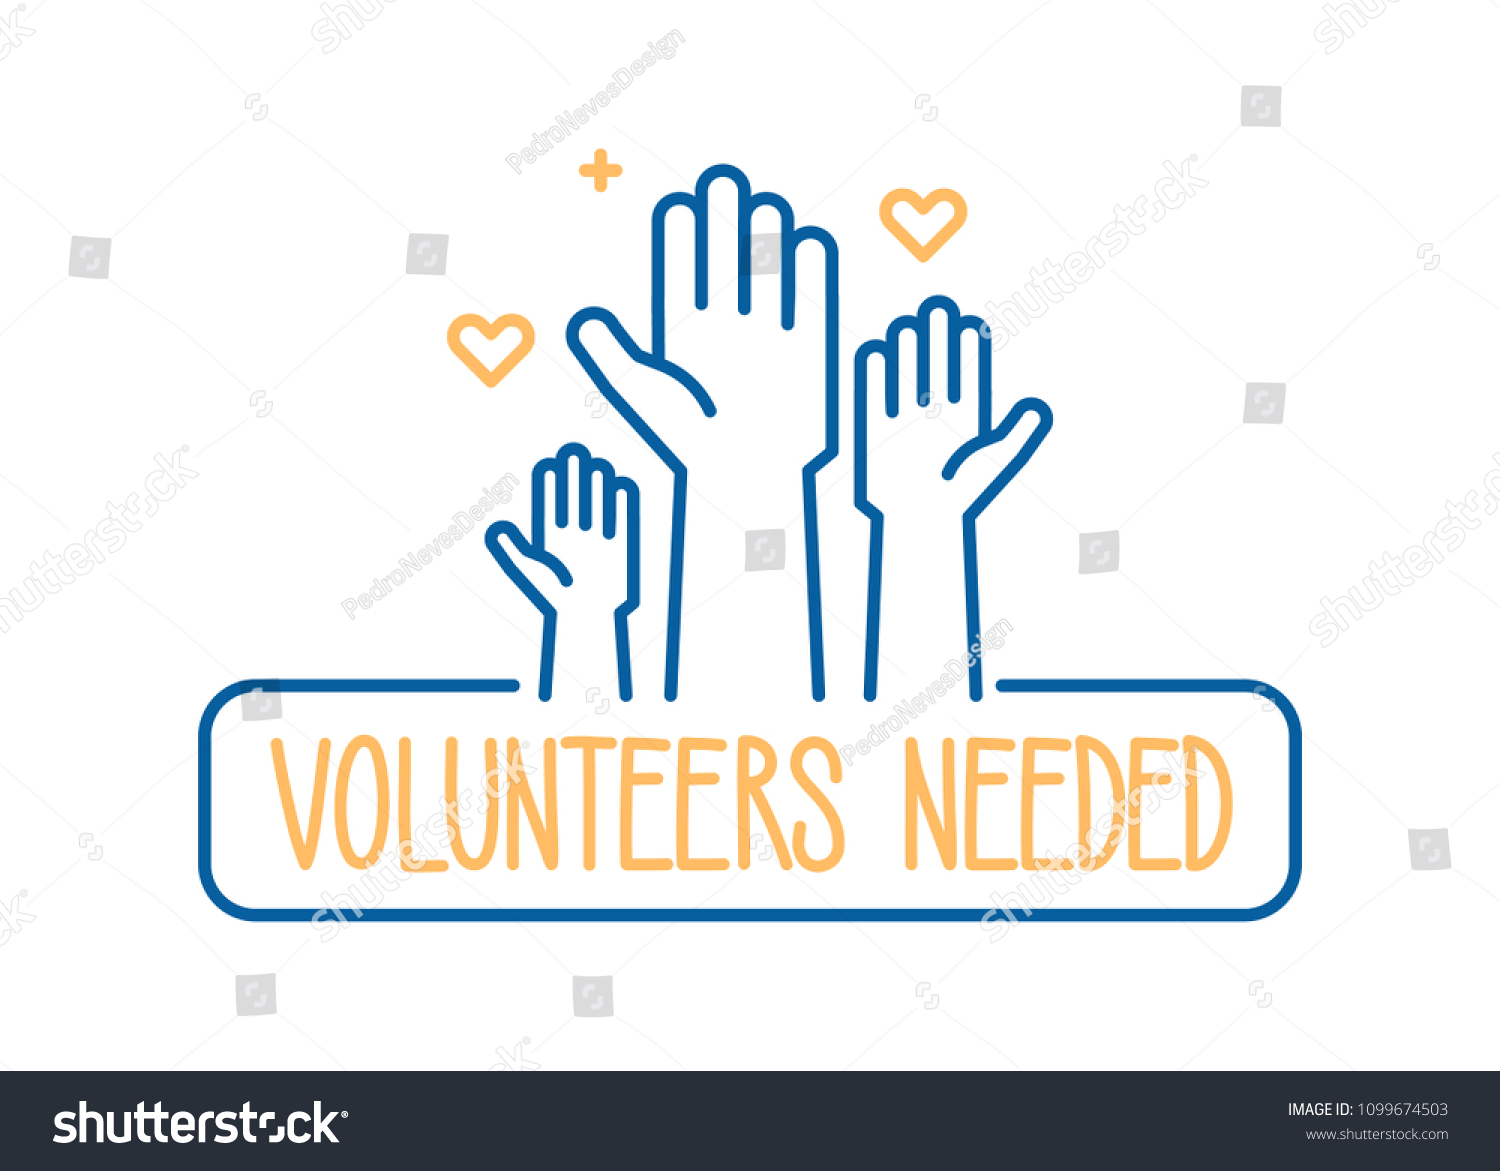 SVG of Volunteers needed banner design. Vector illustration for charity, volunteer work, community assistance. Crowd of people ready available to help and contribute with hands raised. Positive foundatio svg